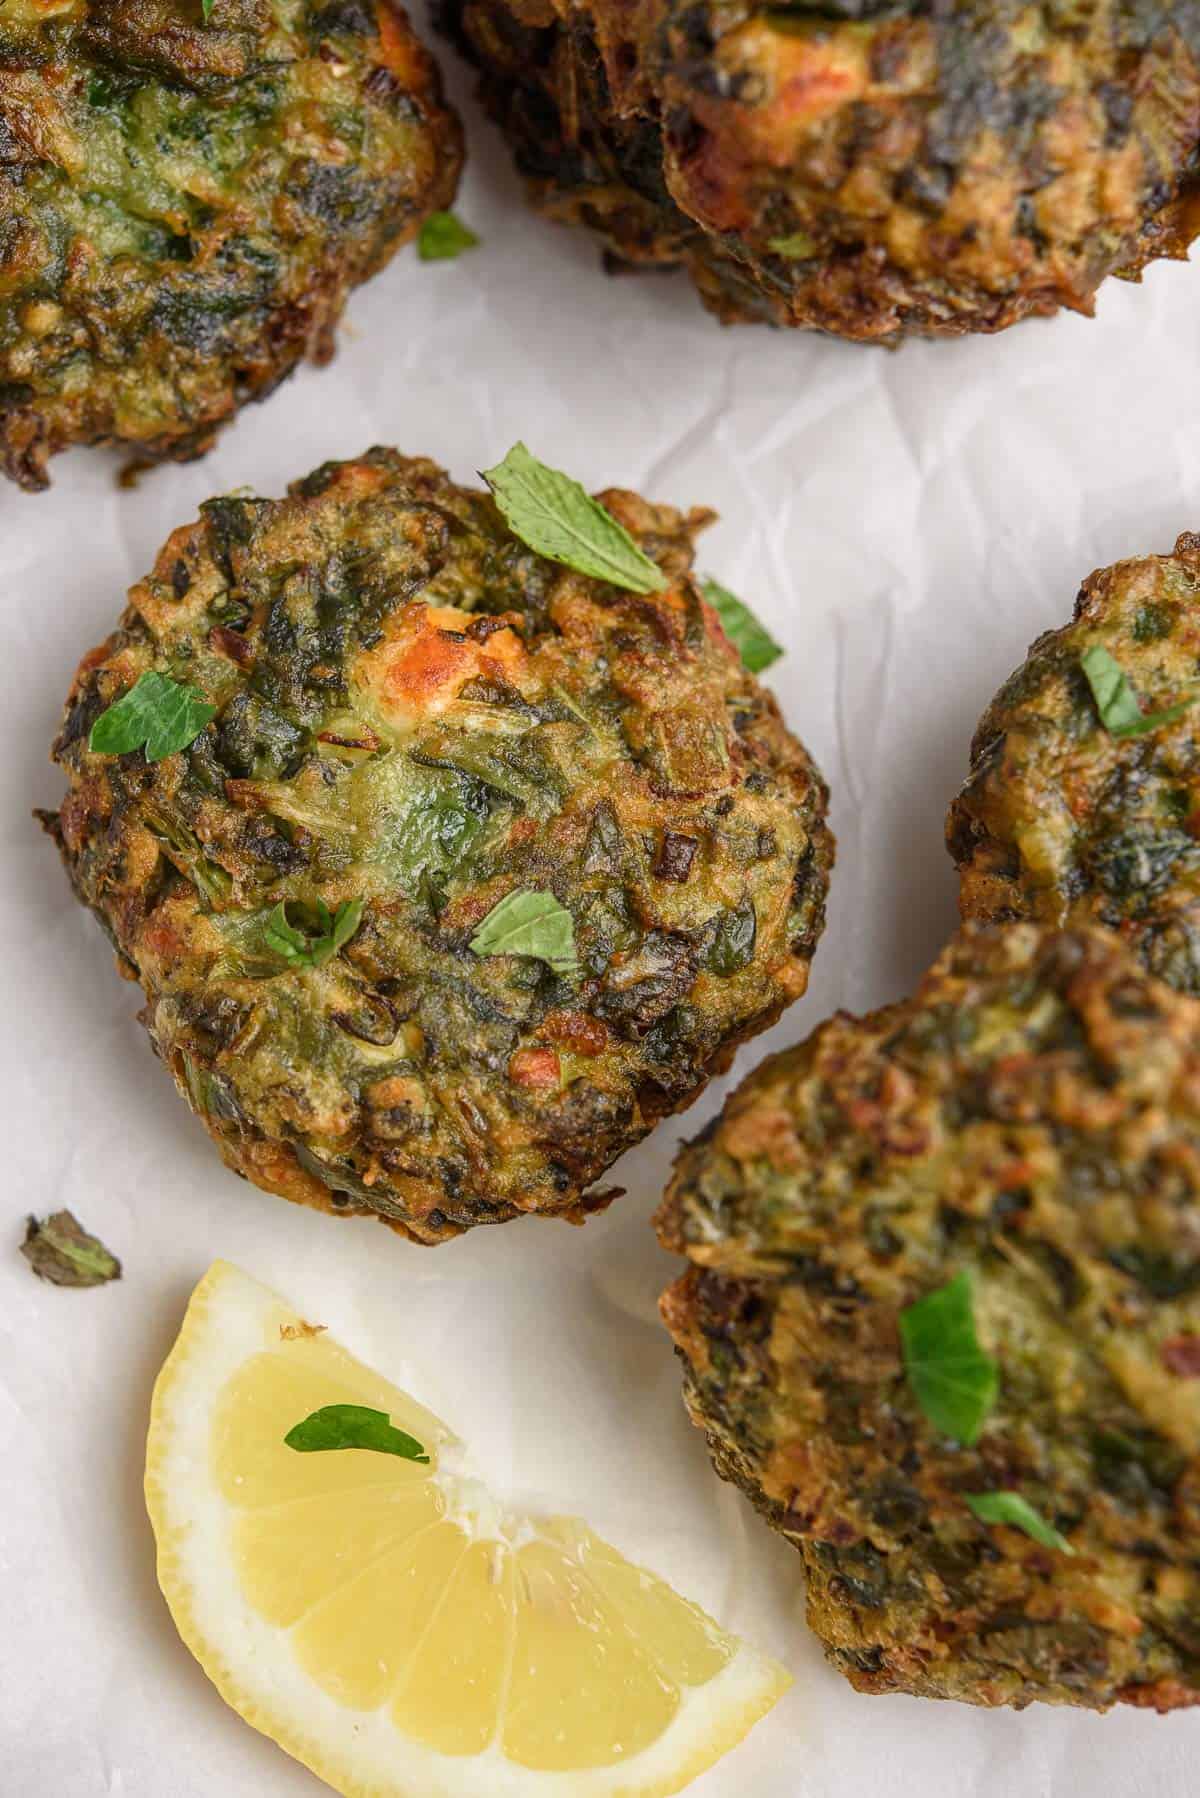 Spinach Cakes